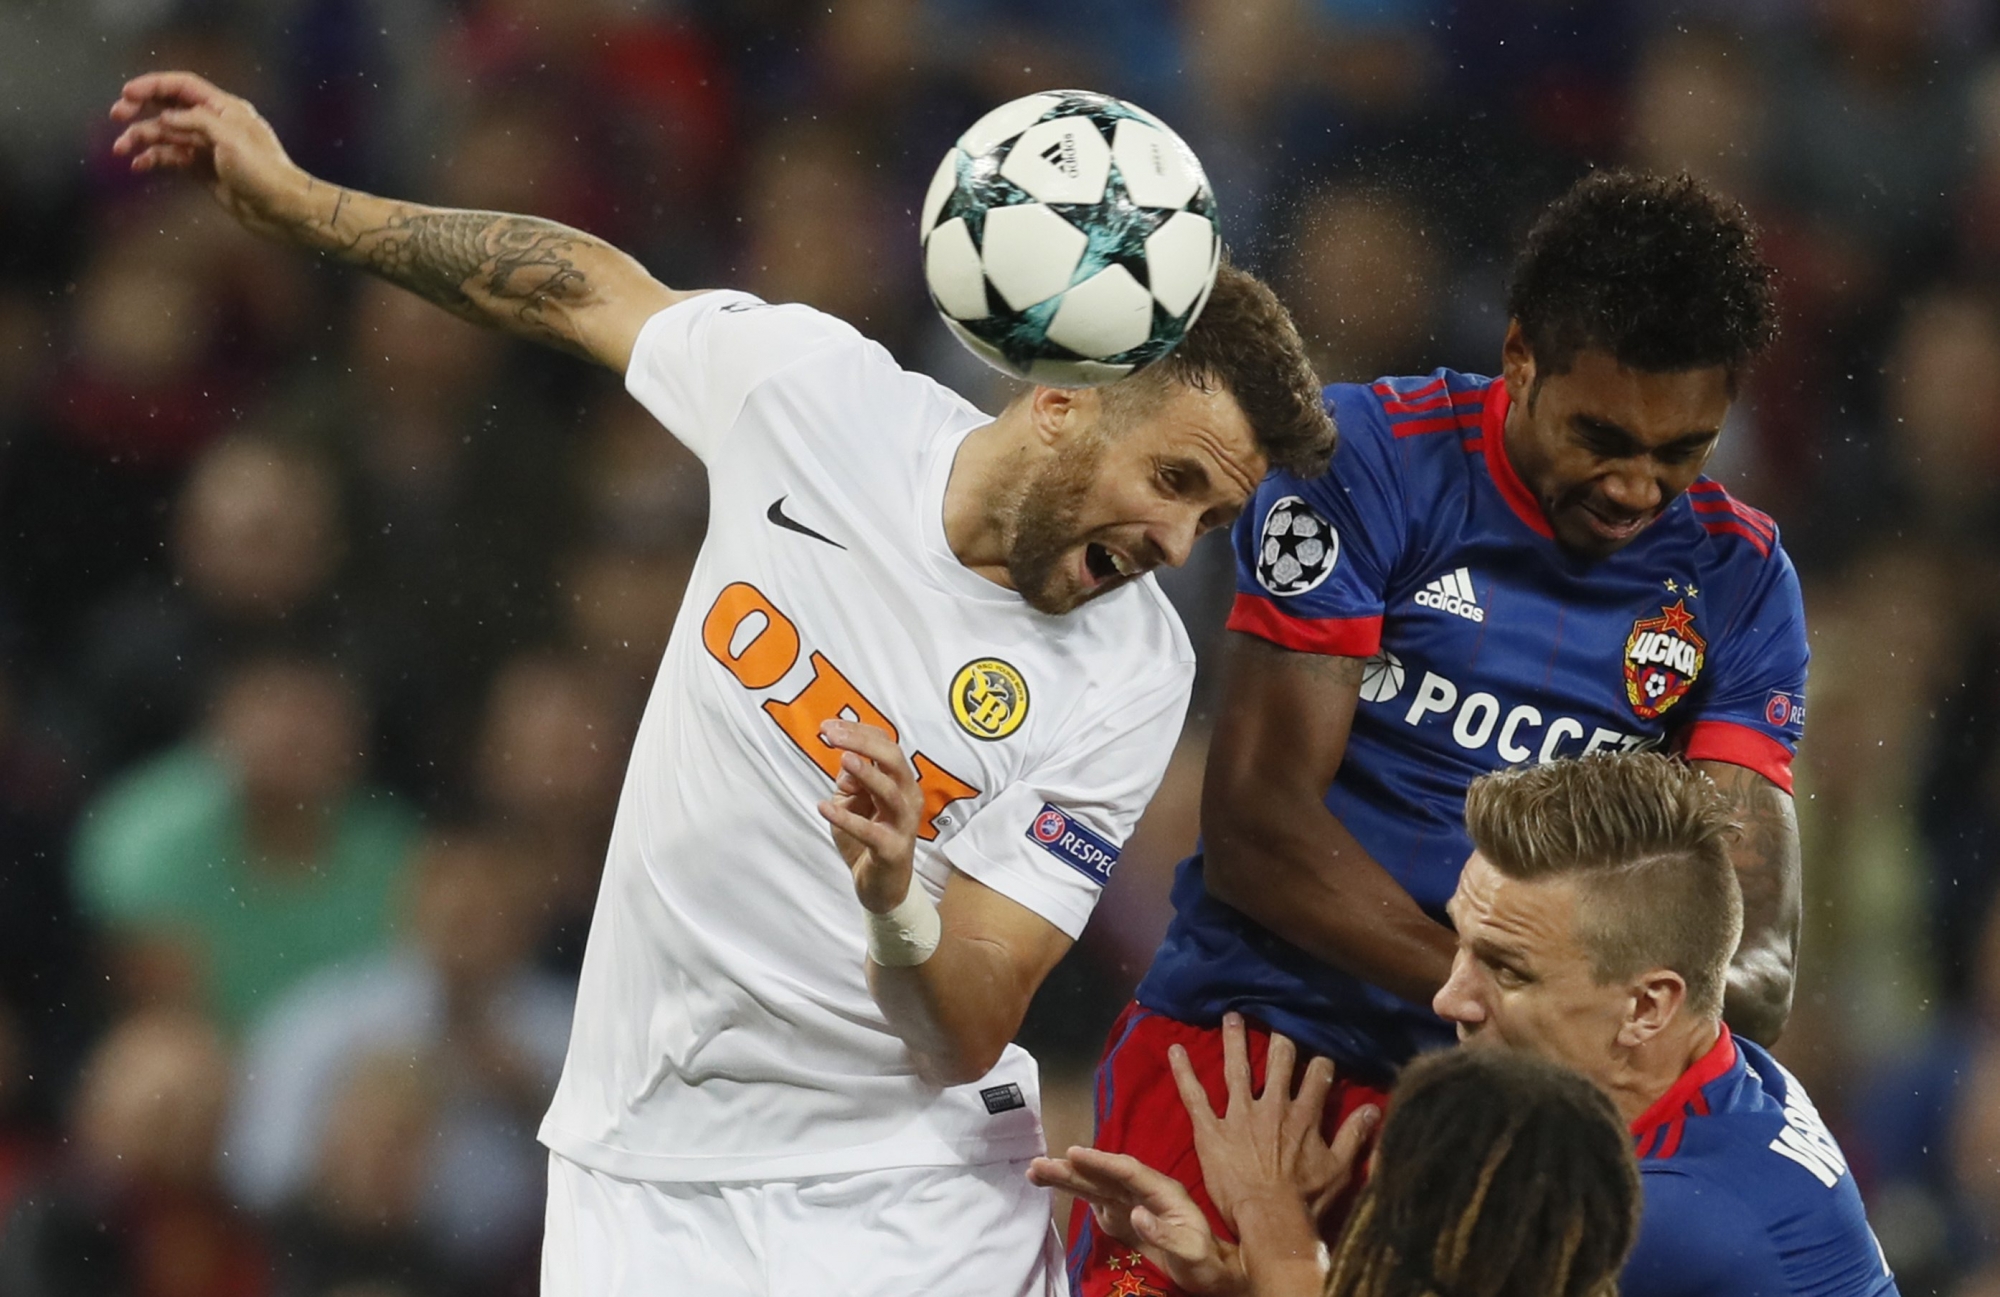 epa06158547 Vitinho (R) of CSKA Moscow fights for a ball with Miralem Sulejmani (L) of  BSC Young Boys during the UEFA Champions League play off second leg match between CSKA Moscow and BSC Young Boys at the VEB Arena in Moscow, Russia, 23 August 2017.  EPA/YURI KOCHETKOV RUSSIA SOCCER UEFA CHAMPIONS LEAGUE PLAY OFF